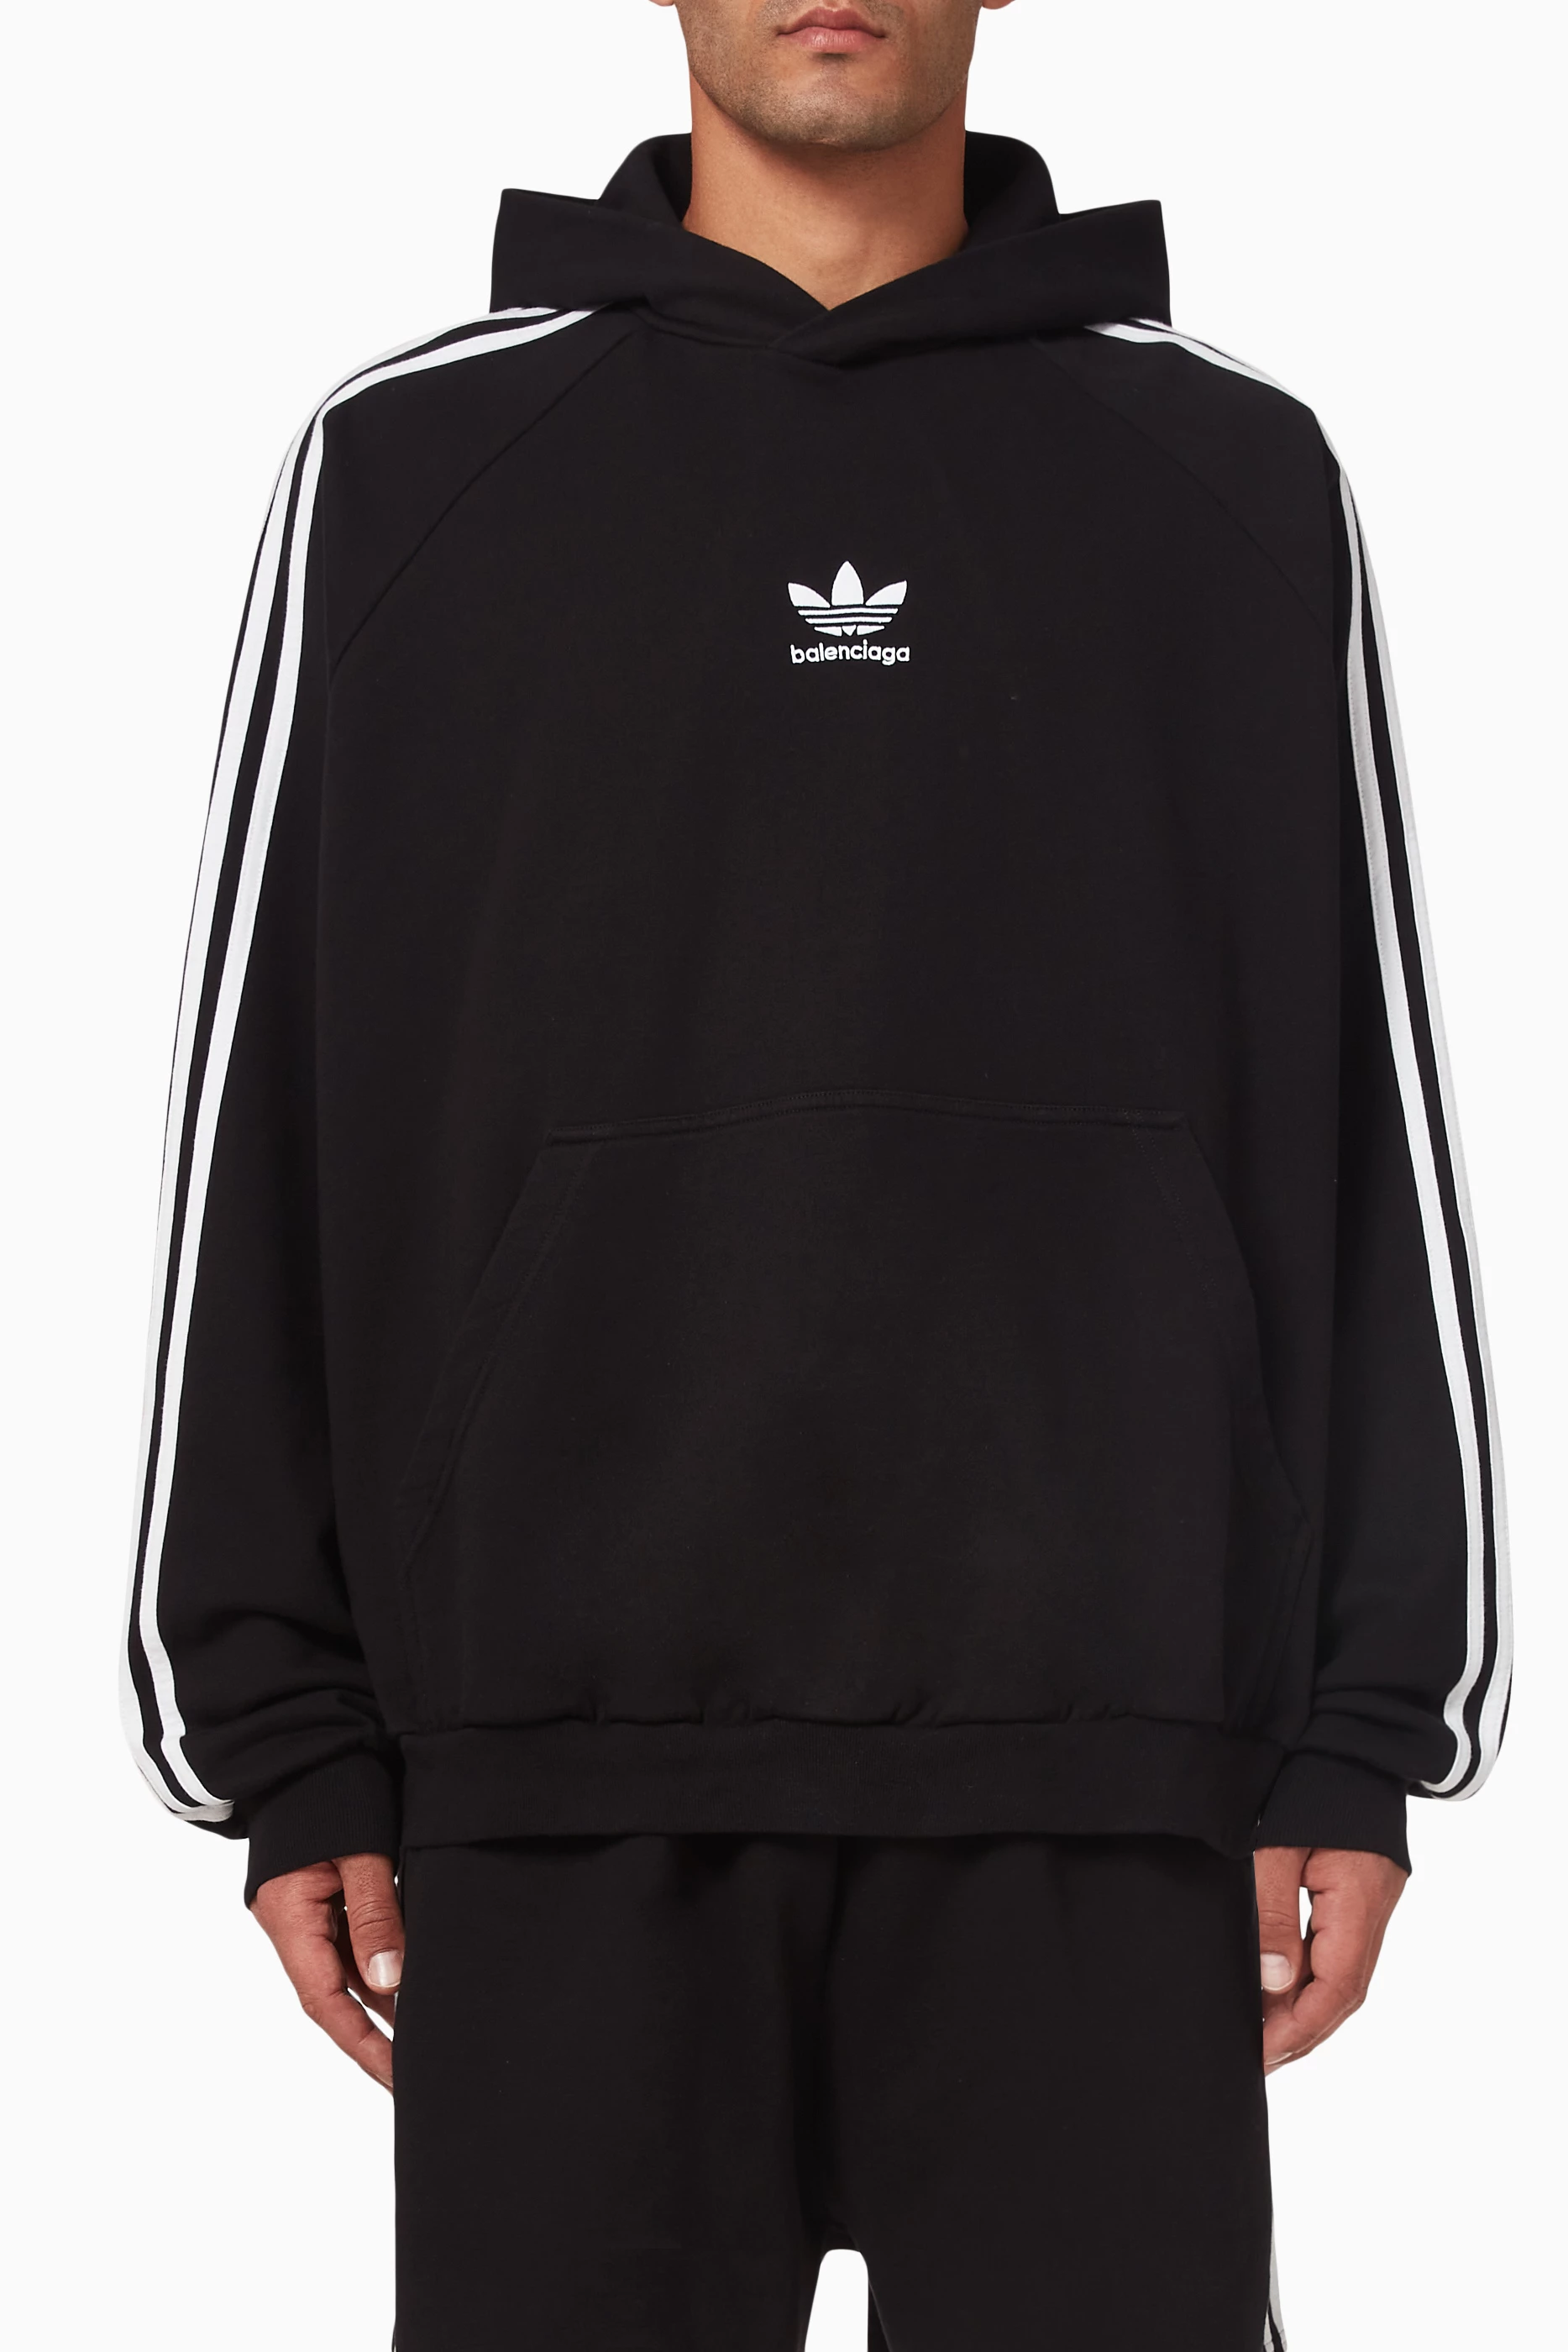 Buy Balenciaga Black x Adidas Large Fit Hoodie in Cotton Terry for